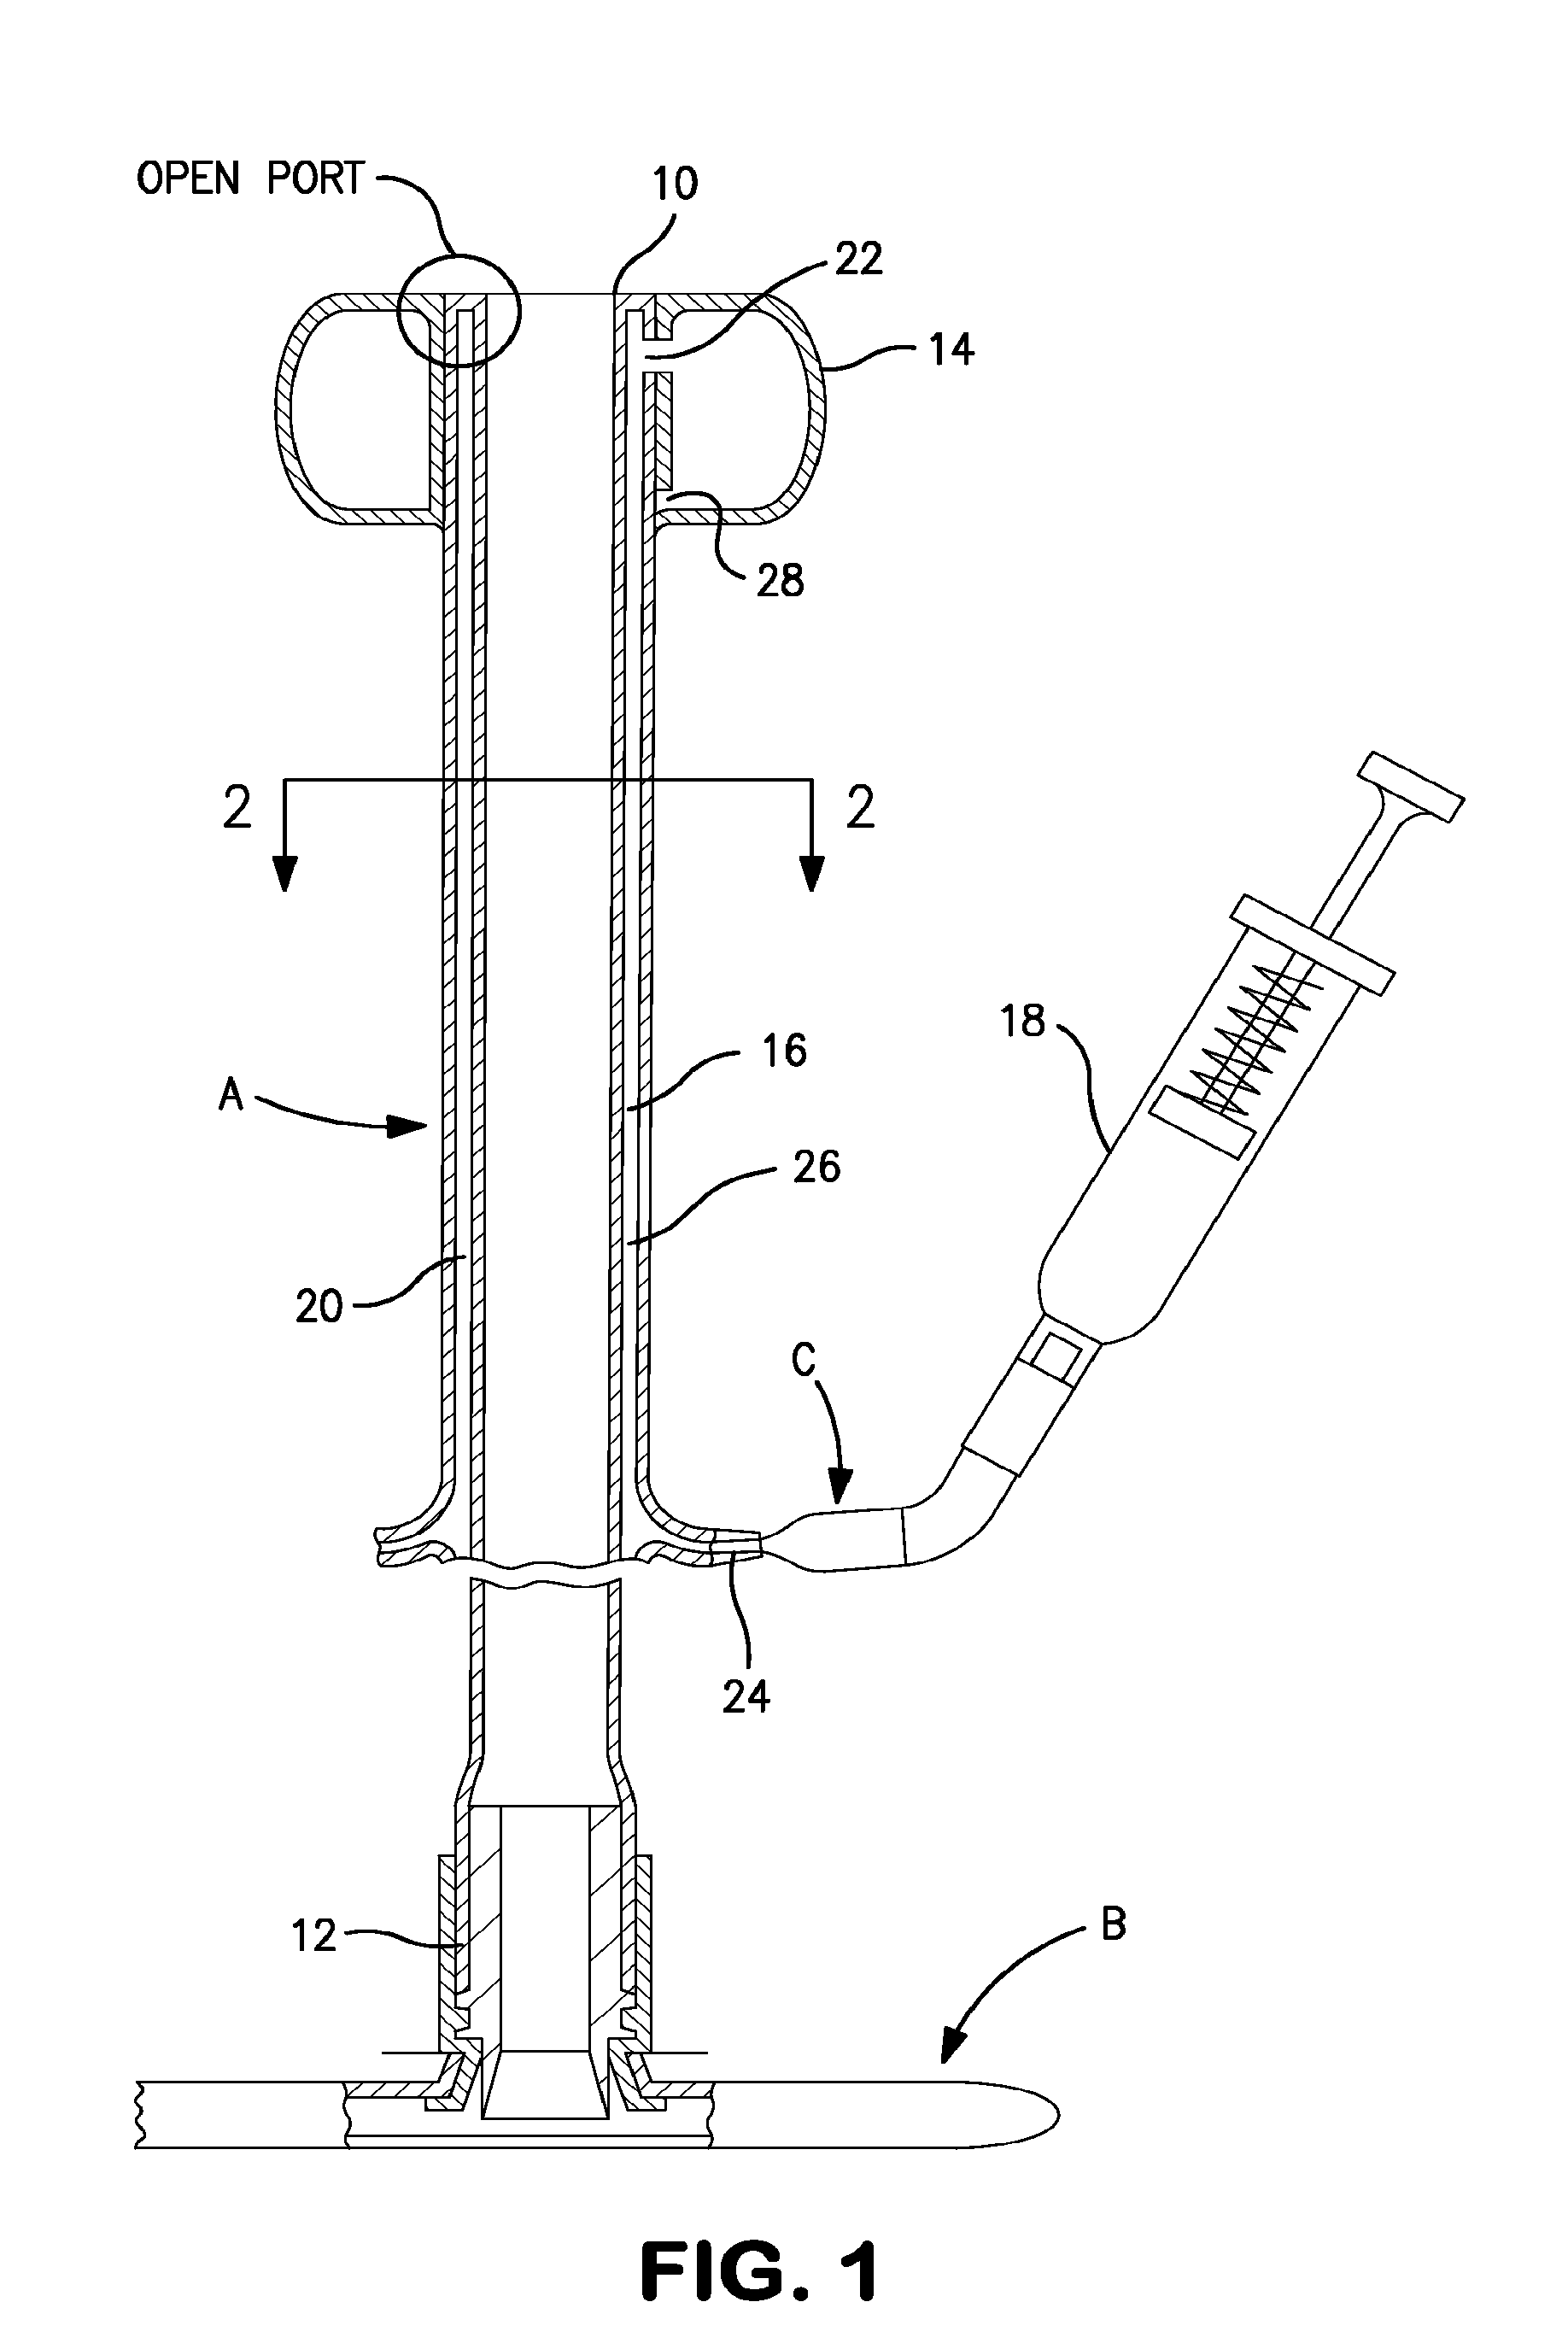 Apparatus for preventing over inflation of the retention balloon in medical catheters and airway devices